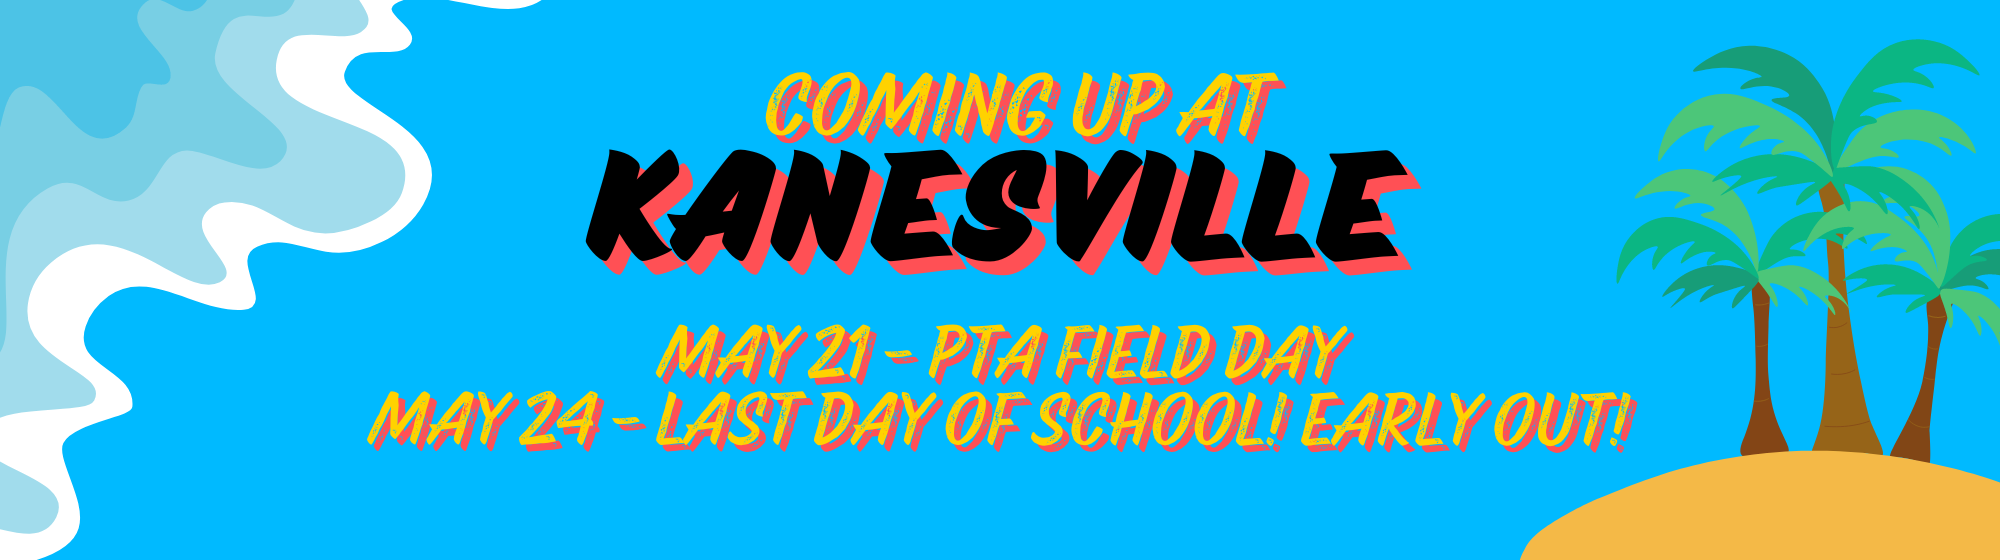 Coming up at Kanesville: May 21 - PTA Field Day; May 24 - Last day of School! Early Out!